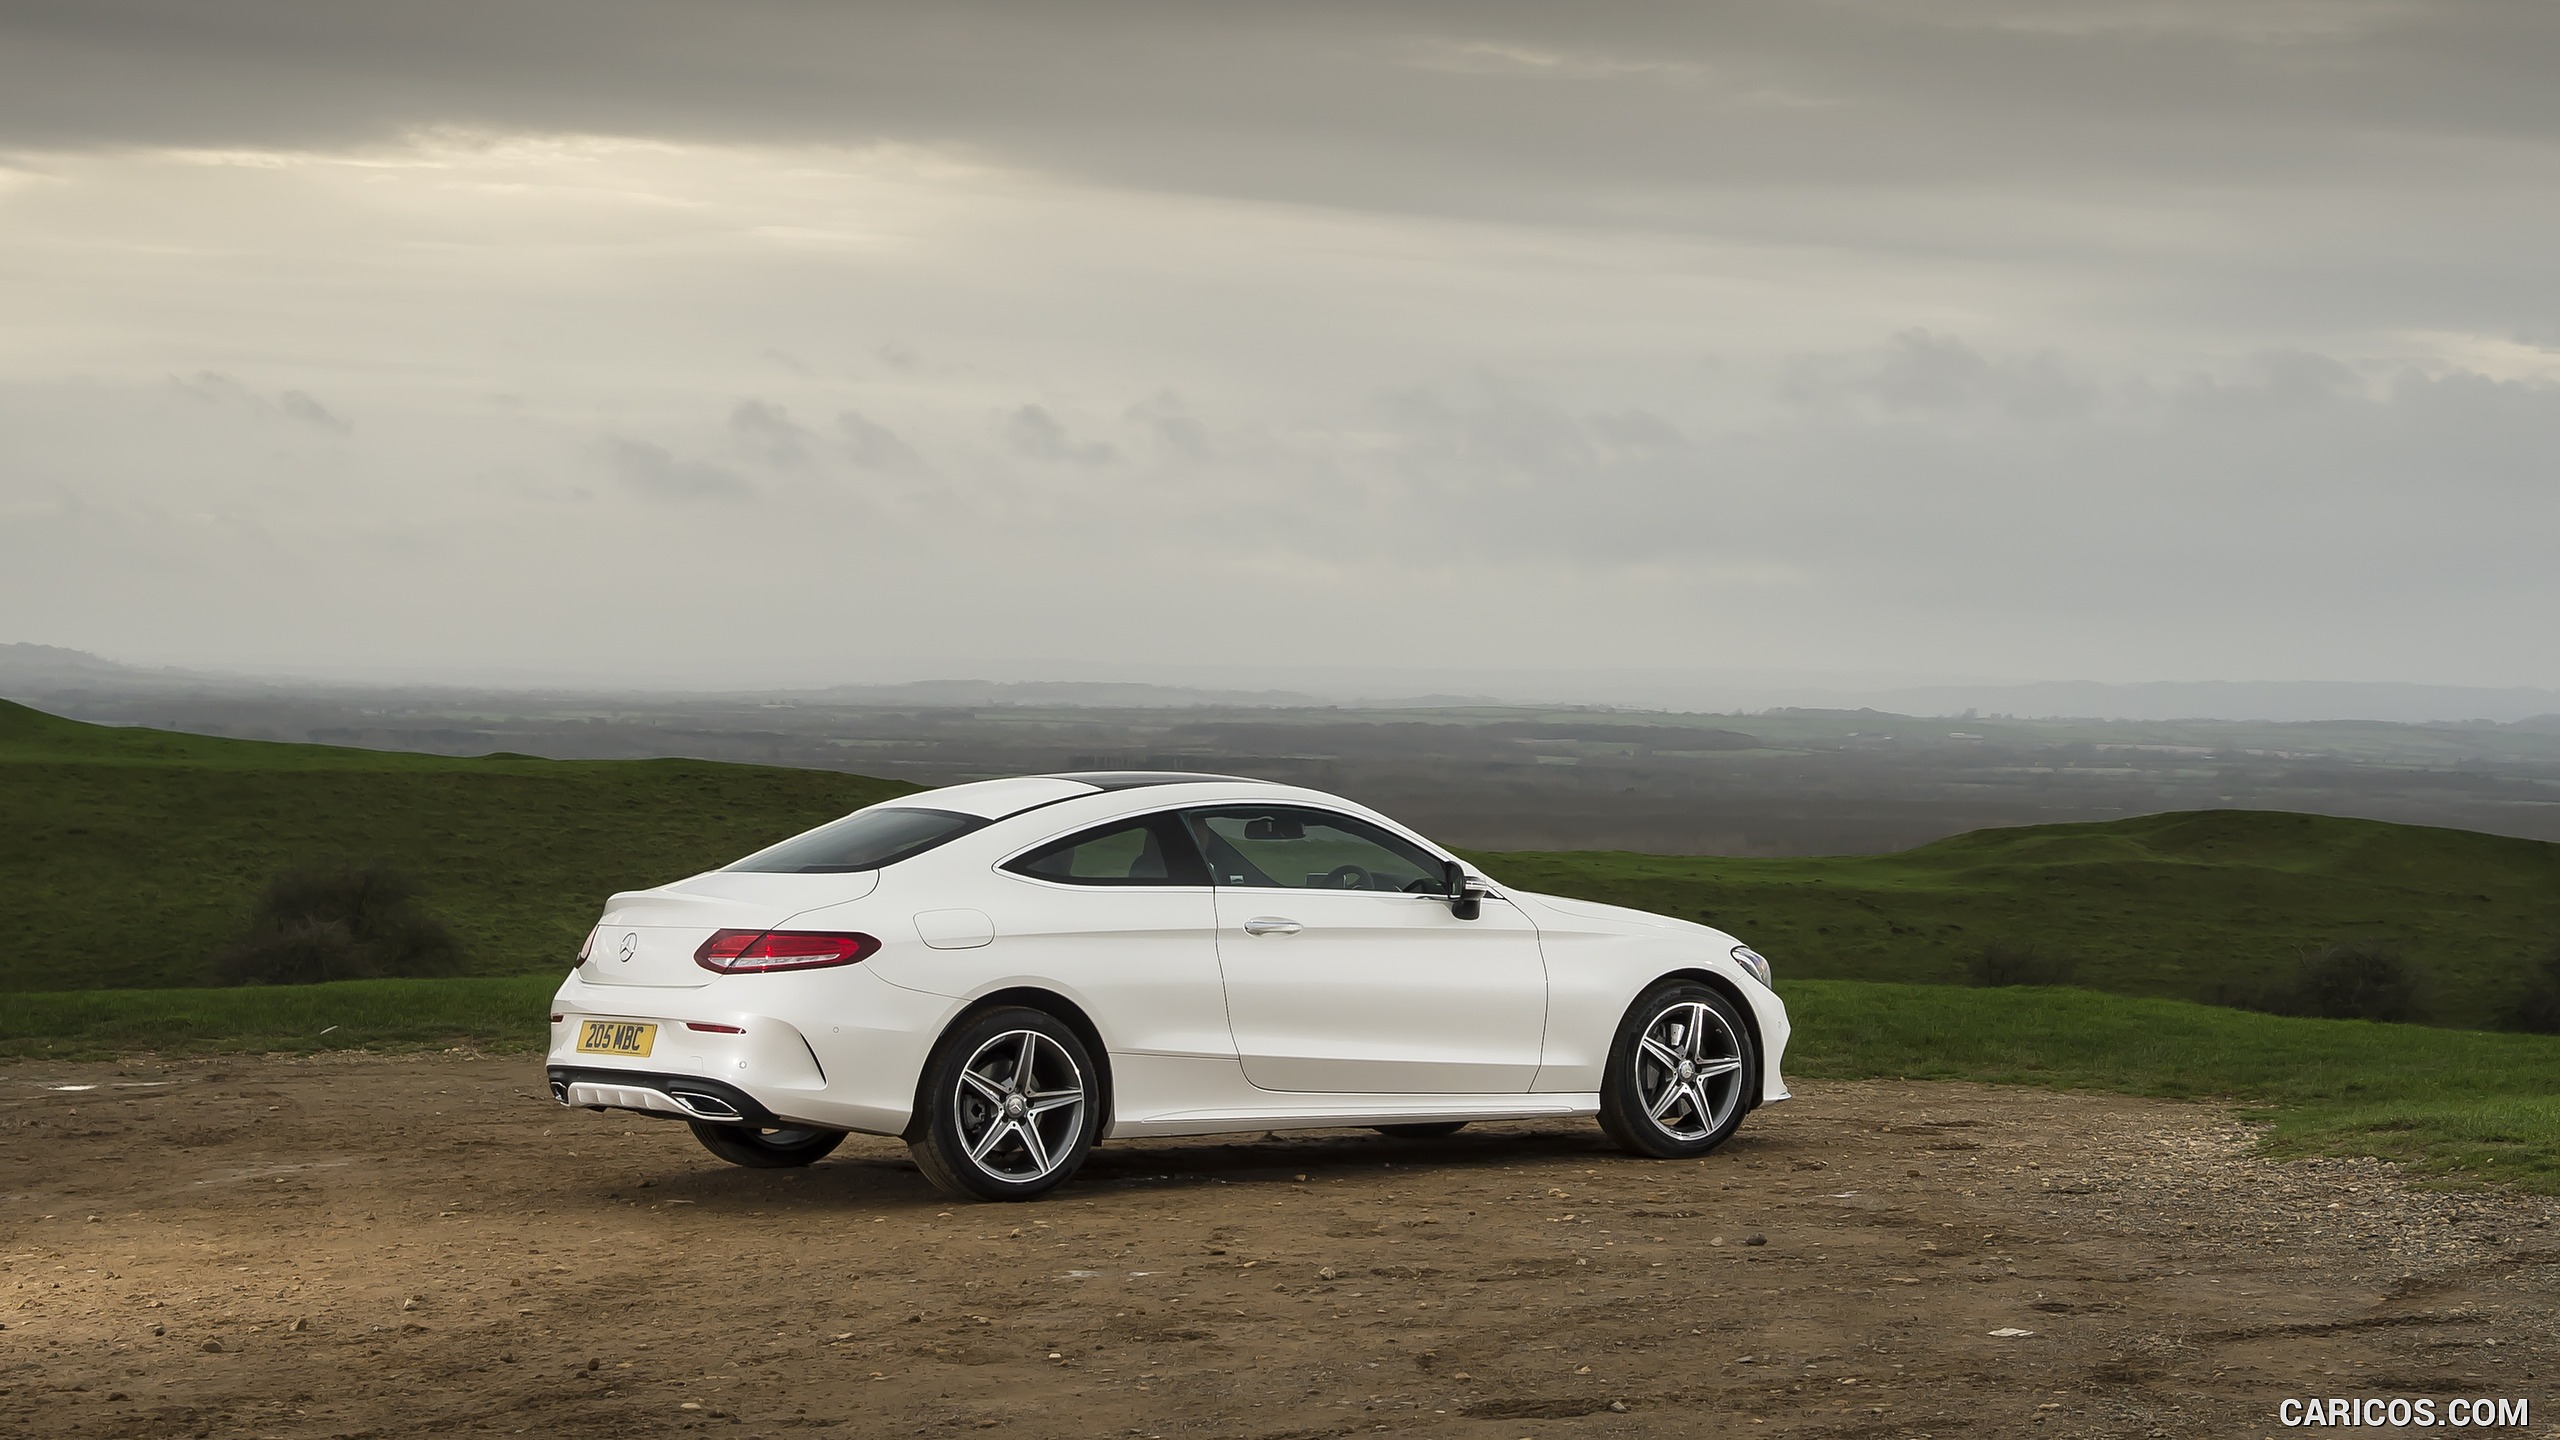 2017 Mercedes-Benz C-Class Coupe (UK-Spec) - Side, #120 of 210